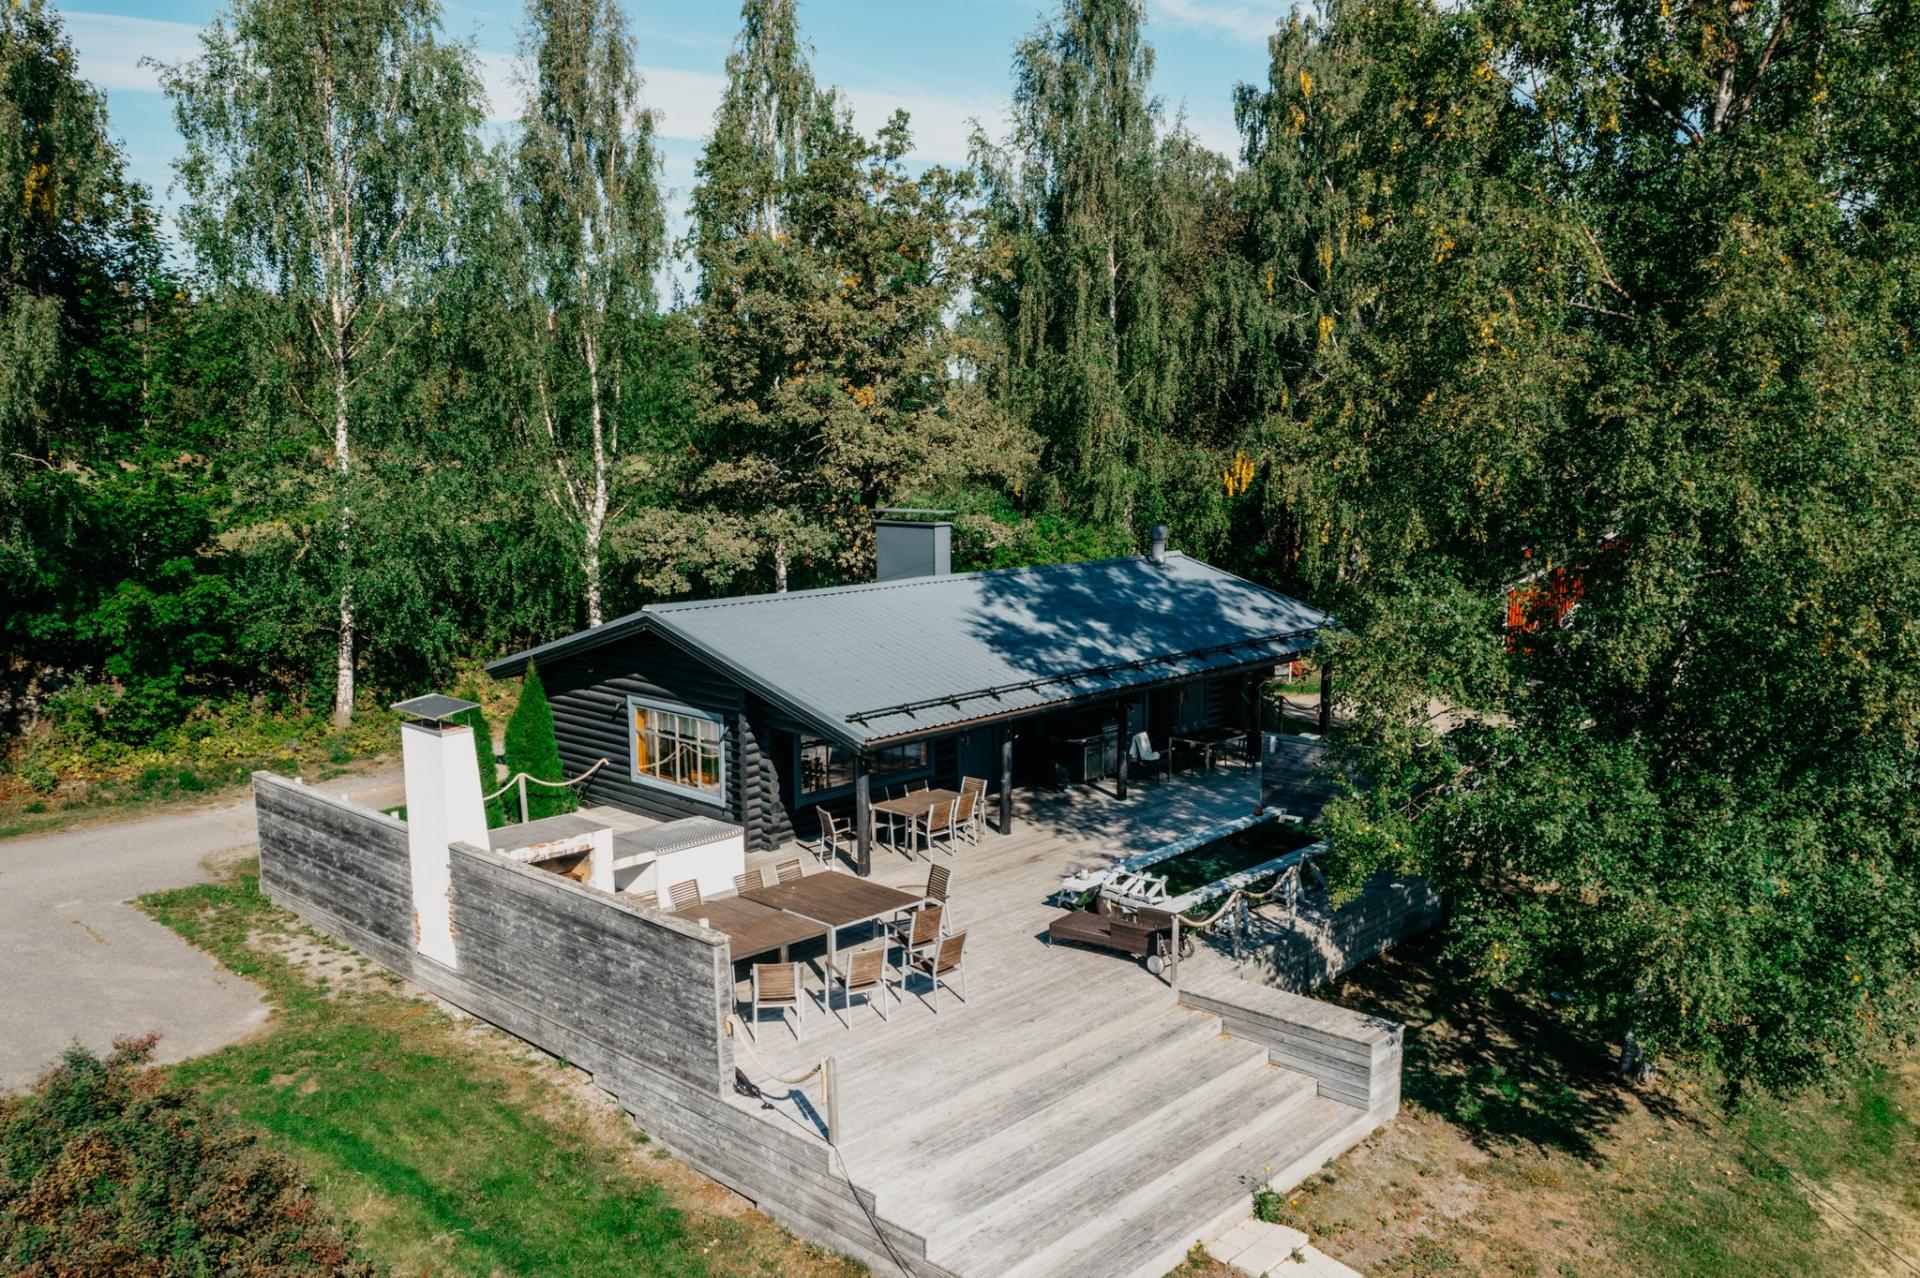 A modern sauna building with a large deck and seating groups by a lake. 